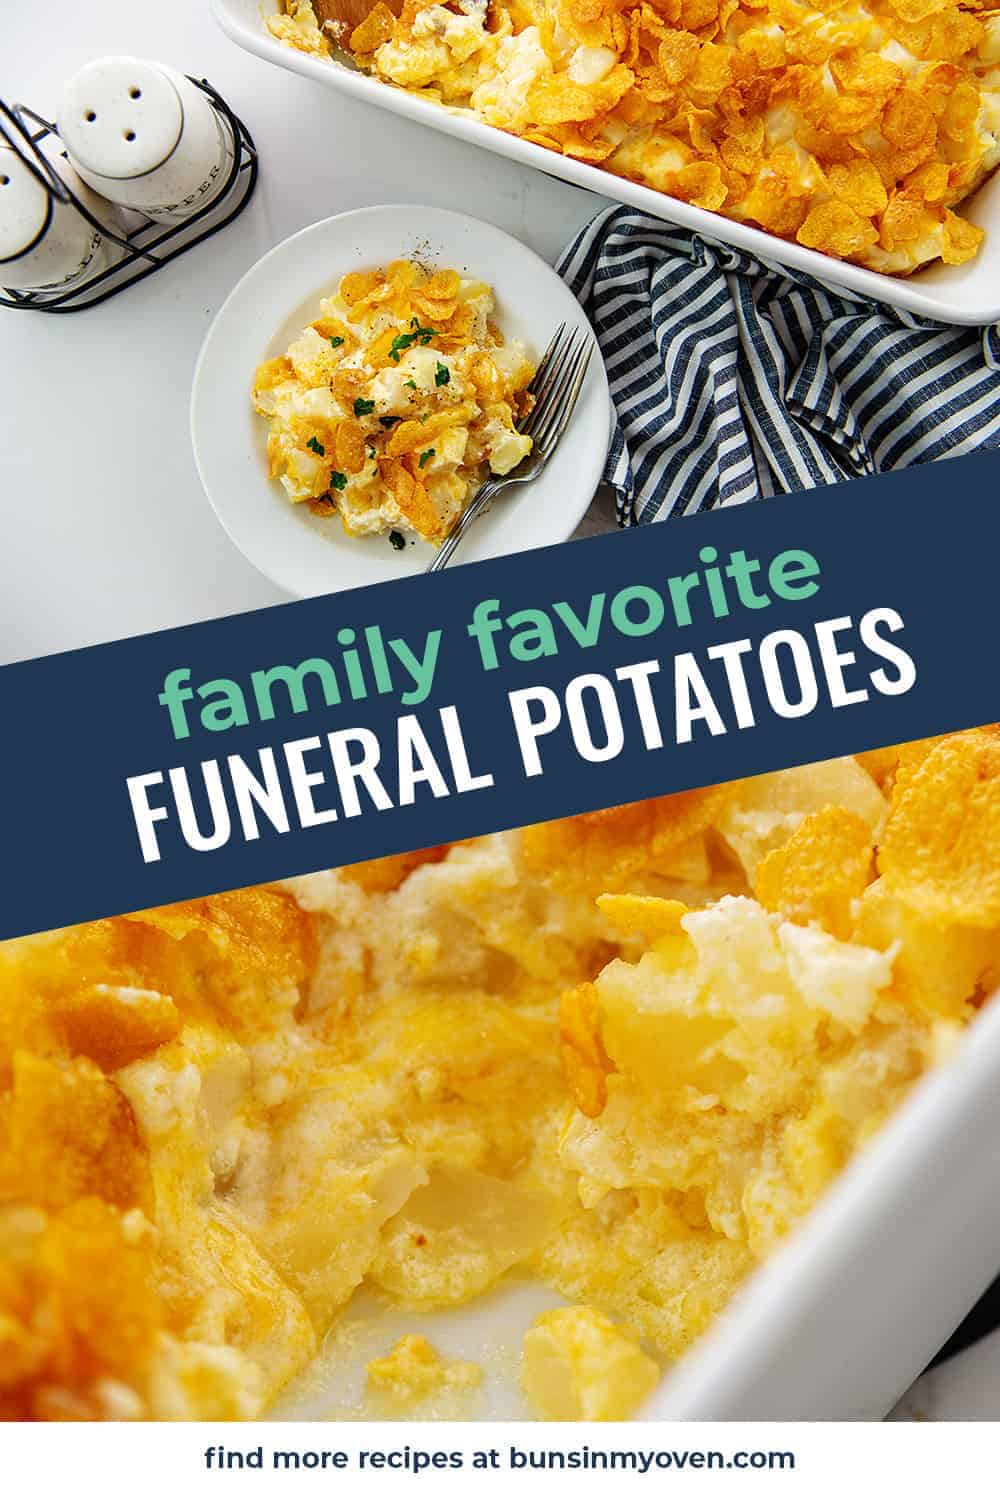 collage of funeral potatoes recipe.